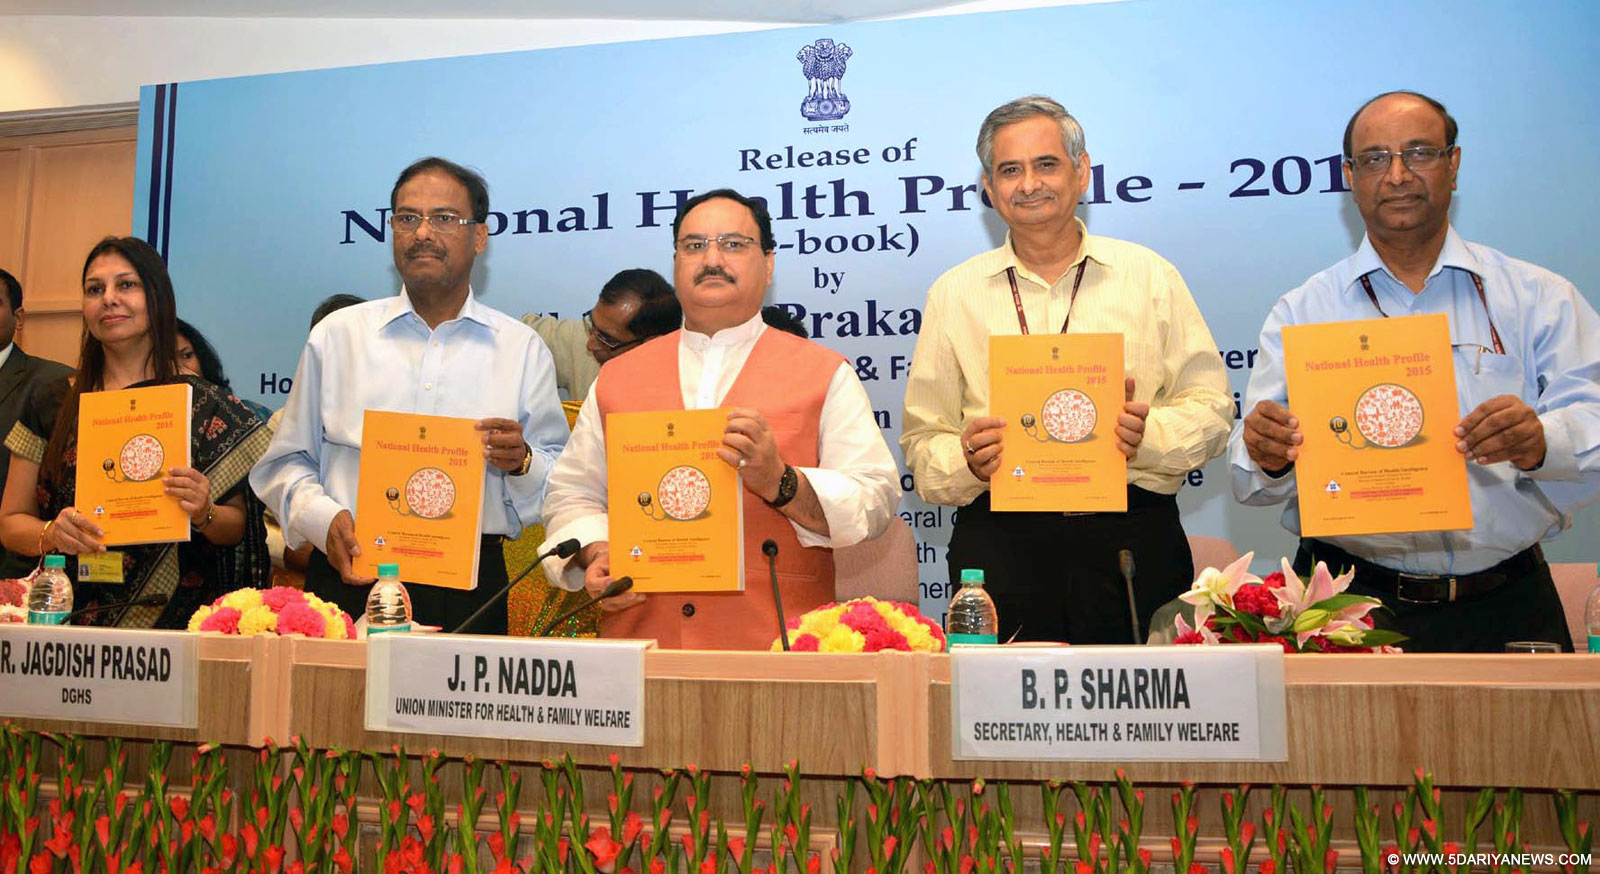 The Union Minister for Health & Family Welfare, Shri J.P. Nadda releasing the “National Health Profile-2015”, published by the Central Bureau of Health Intelligence (CBHI), in New Delhi on September 22, 2015. The secretary, Ministry of Health and Family Welfare, Shri B.P. Sharma and the DGHS, Dr. (Prof.) Jagdish Prasad are also seen.